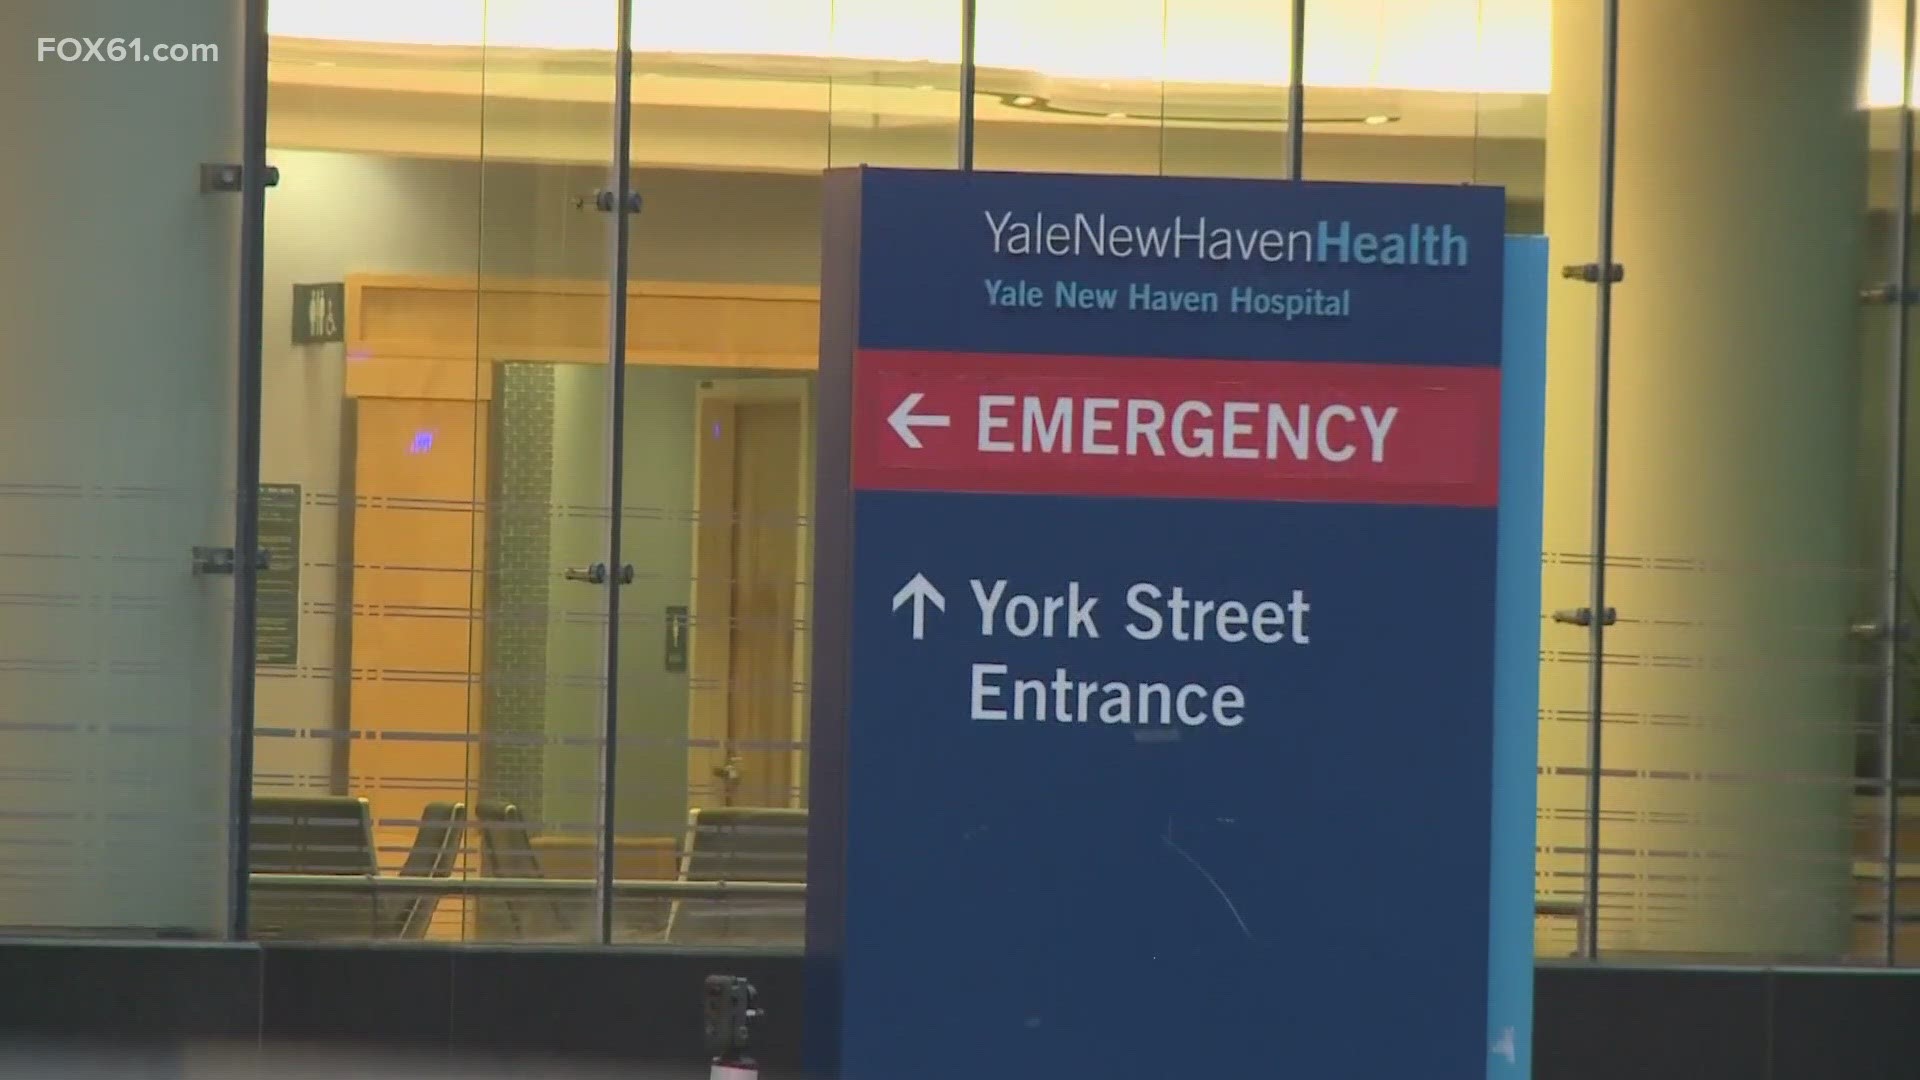 Police are investigating after a 13-year-old girl was shot outside Yale New Haven Hospital early Sunday morning.